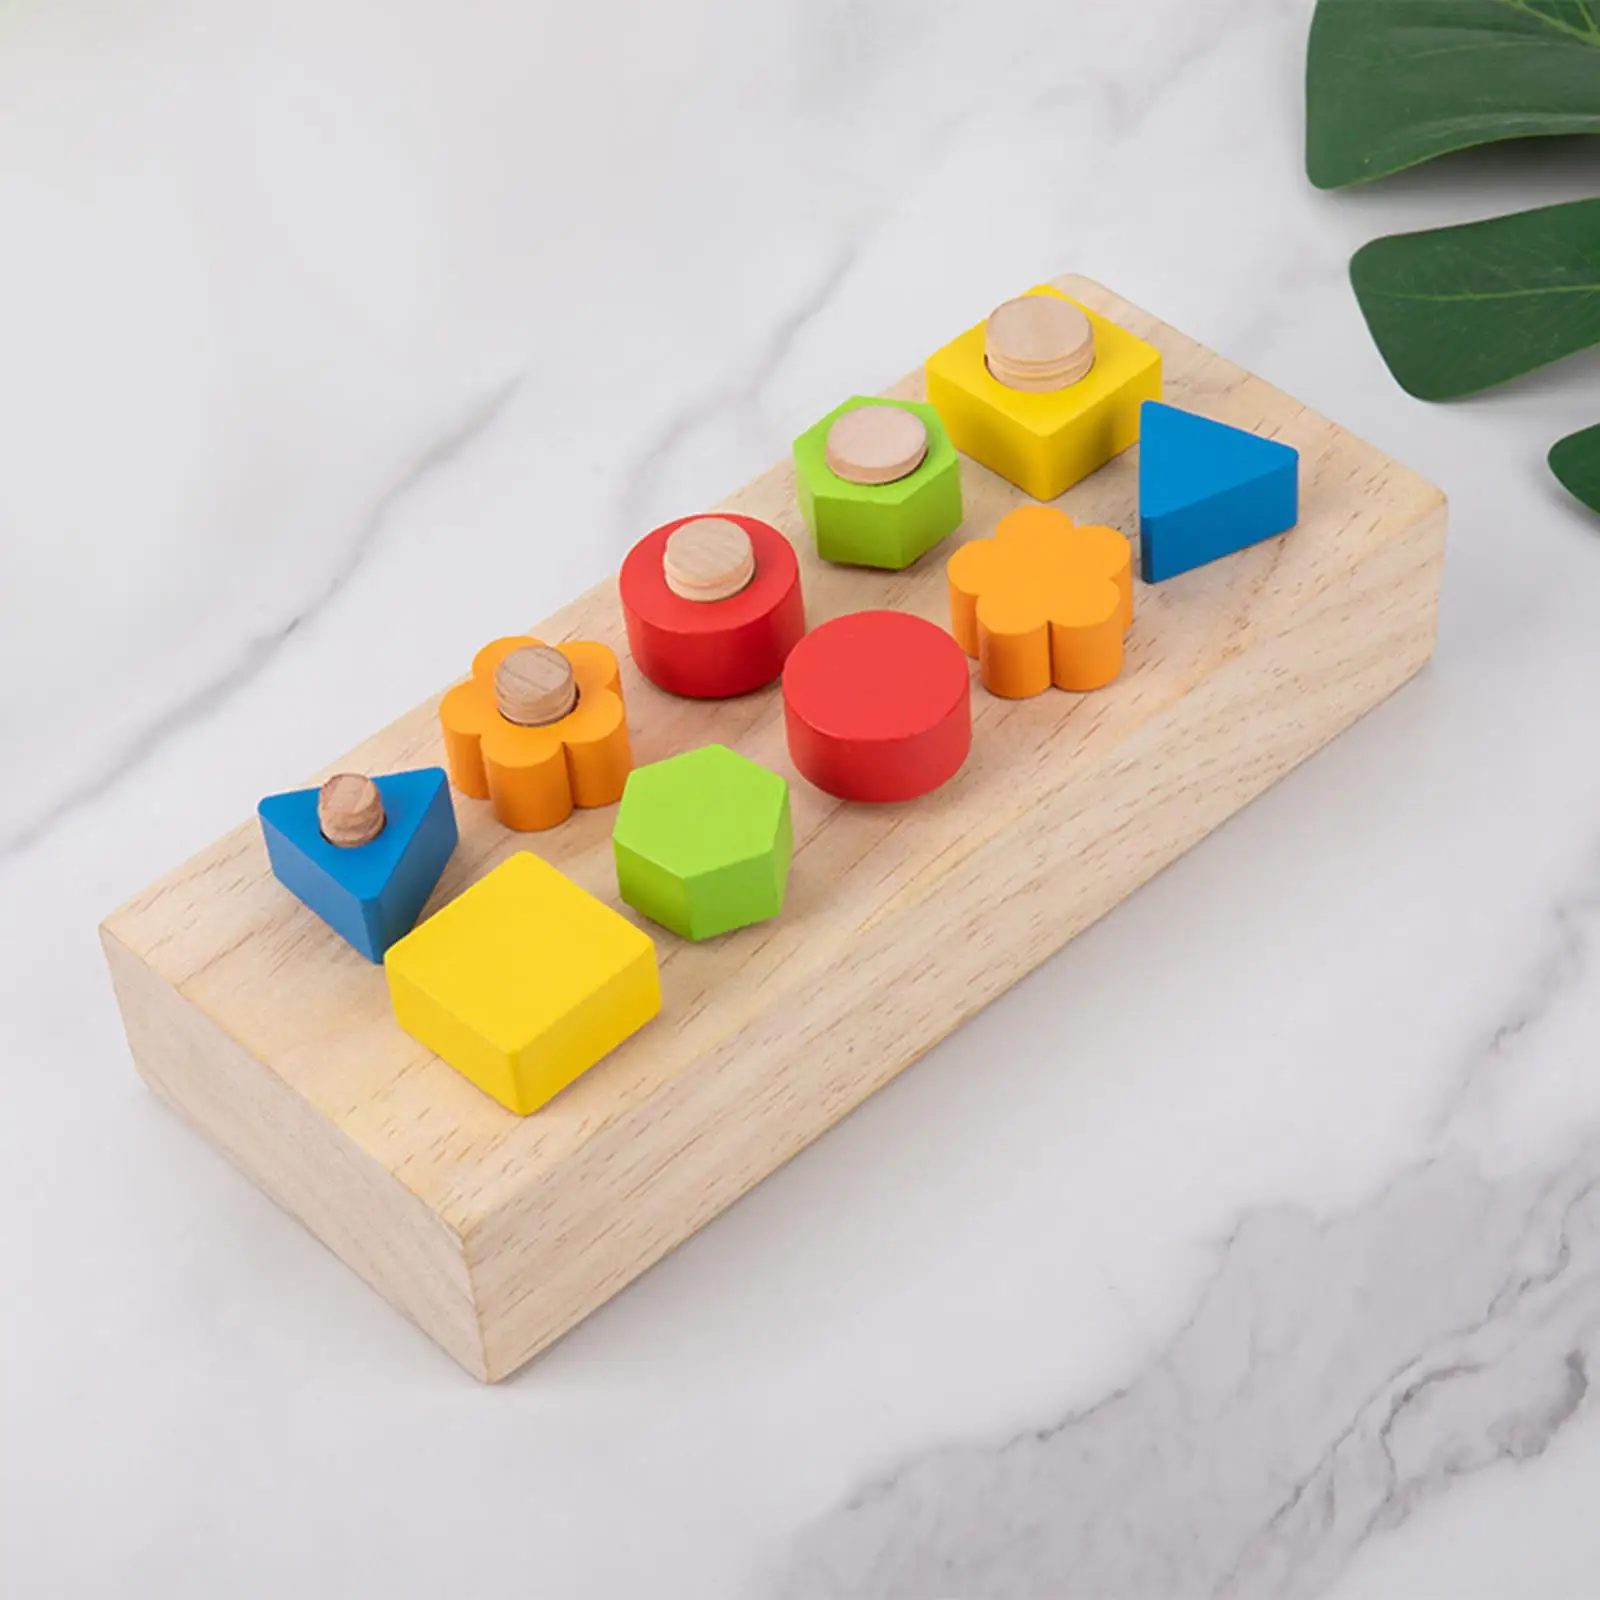 Montessori Wood Nuts and Bolts Board  Material Color &  , Developing Brain Power Develop  Gifts